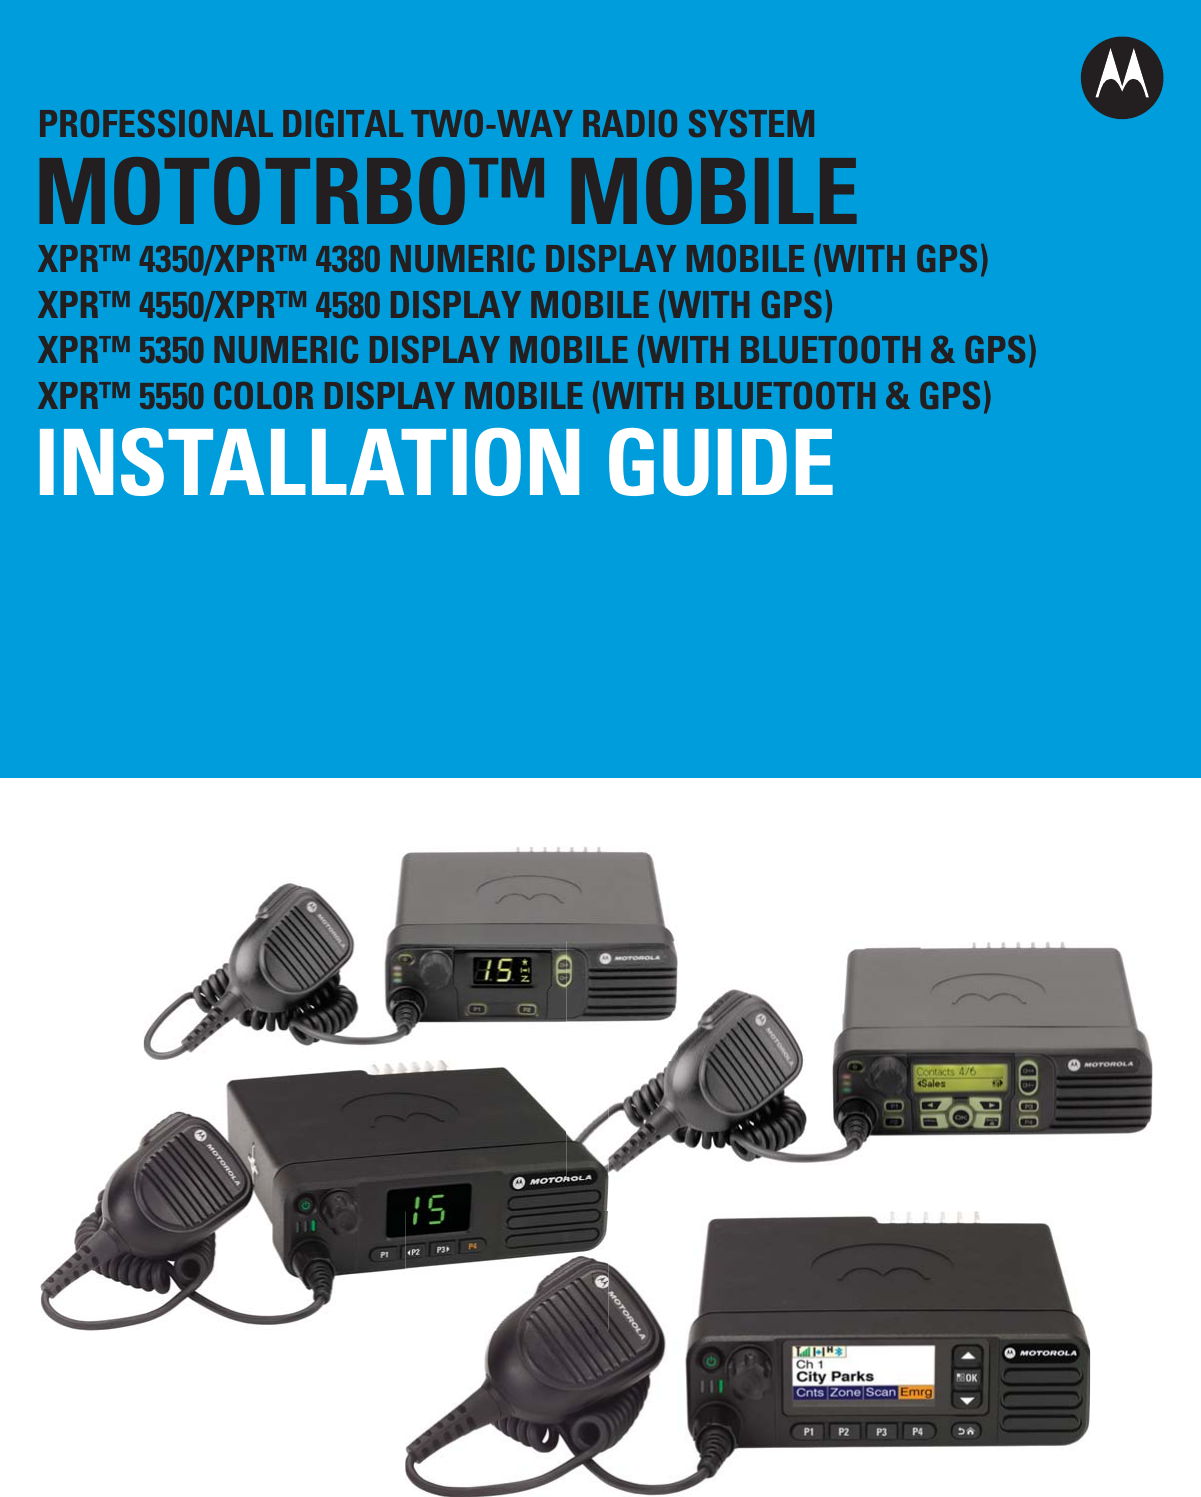 PROFESSIONAL DIGITAL TWO-WAY RADIO SYSTEMMOTOTRBO™ MOBILEINSTALLATION GUIDEXPR™ 4350/XPR™ 4380 NUMERIC DISPLAY MOBILE (WITH GPS)XPR™ 4550/XPR™ 4580 DISPLAY MOBILE (WITH GPS)XPR™ 5350 NUMERIC DISPLAY MOBILE (WITH BLUETOOTH &amp; GPS)XPR™ 5550 COLOR DISPLAY MOBILE (WITH BLUETOOTH &amp; GPS)